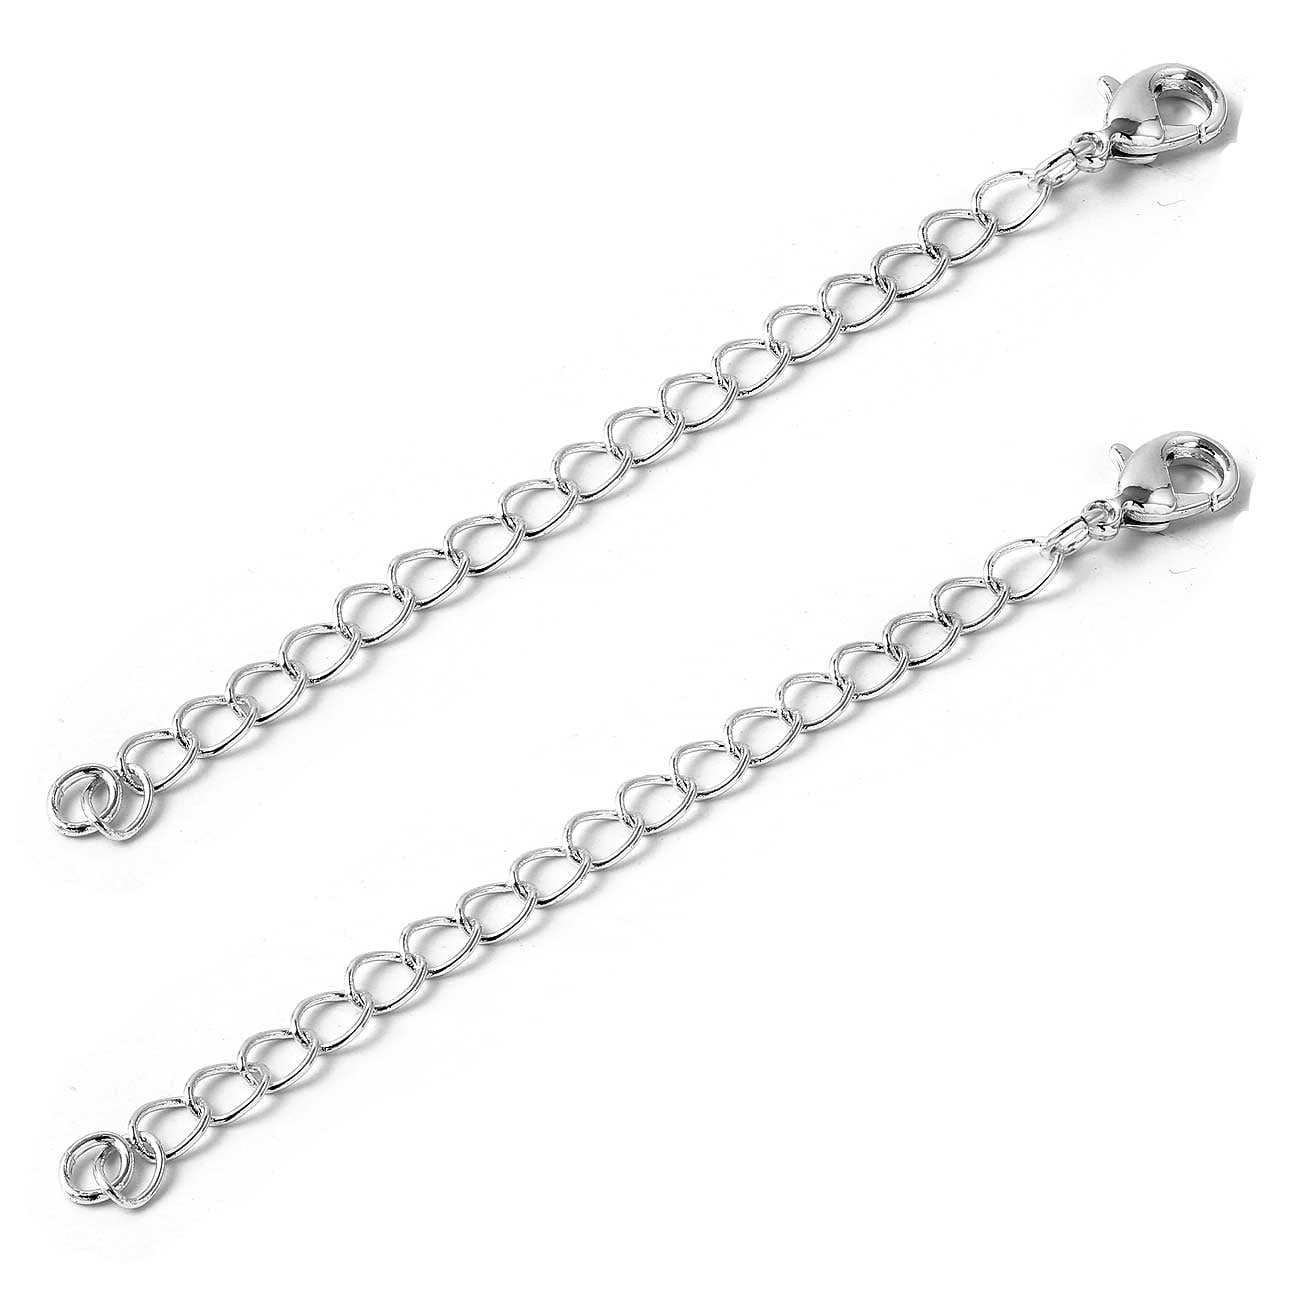 Delicate Cable Chain 2 Sterling Silver Necklace Extender 3 or 4 inches